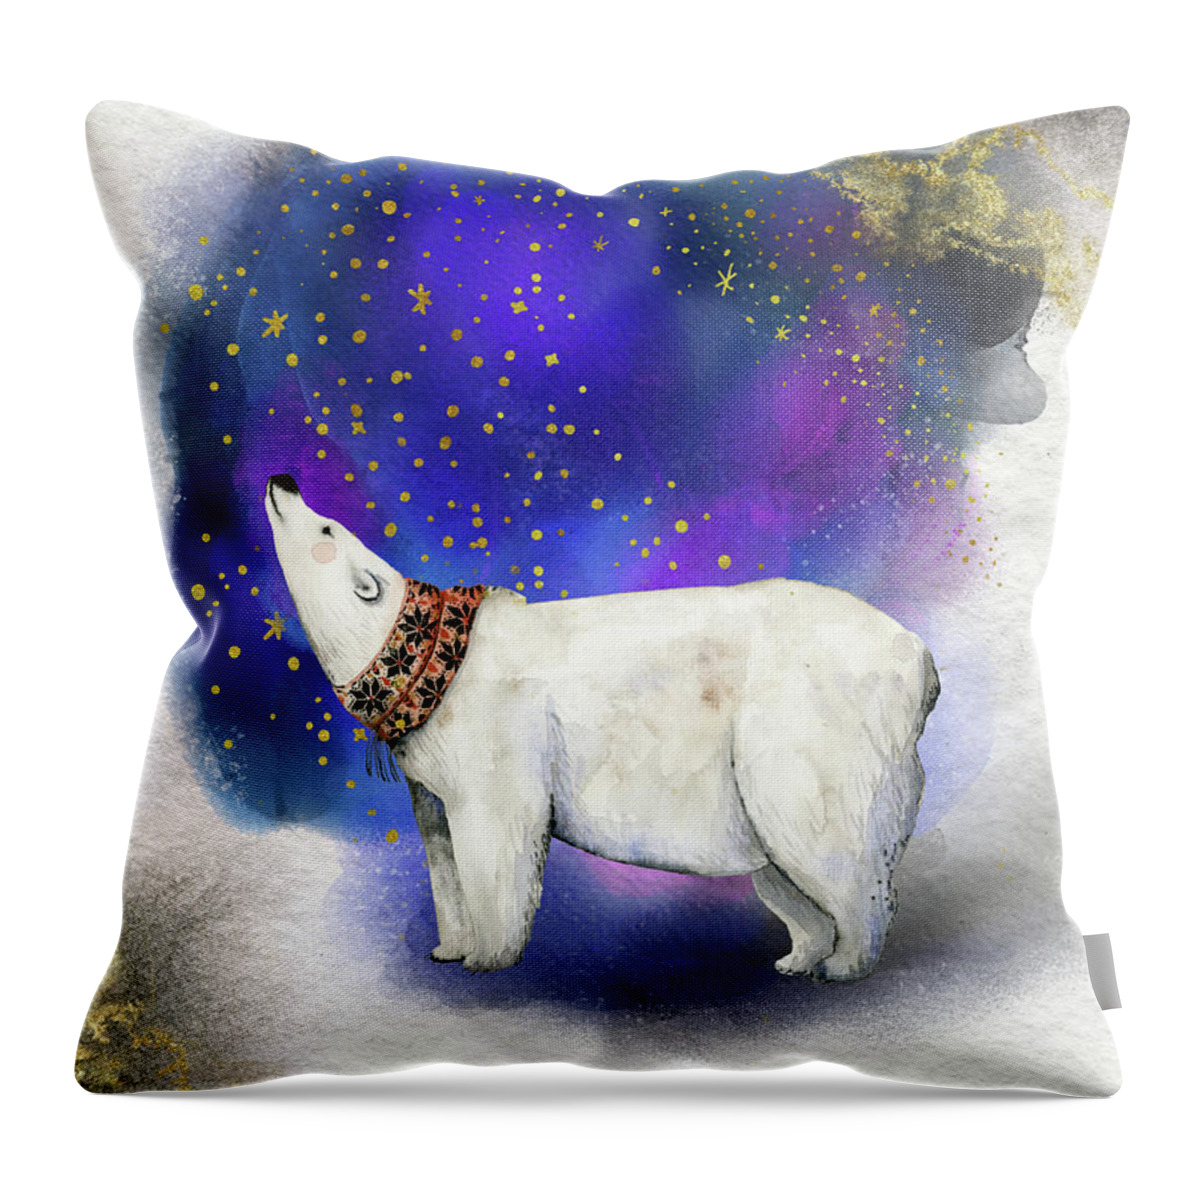 Polar Bear Throw Pillow featuring the painting Polar Bear With Golden Stars by Garden Of Delights